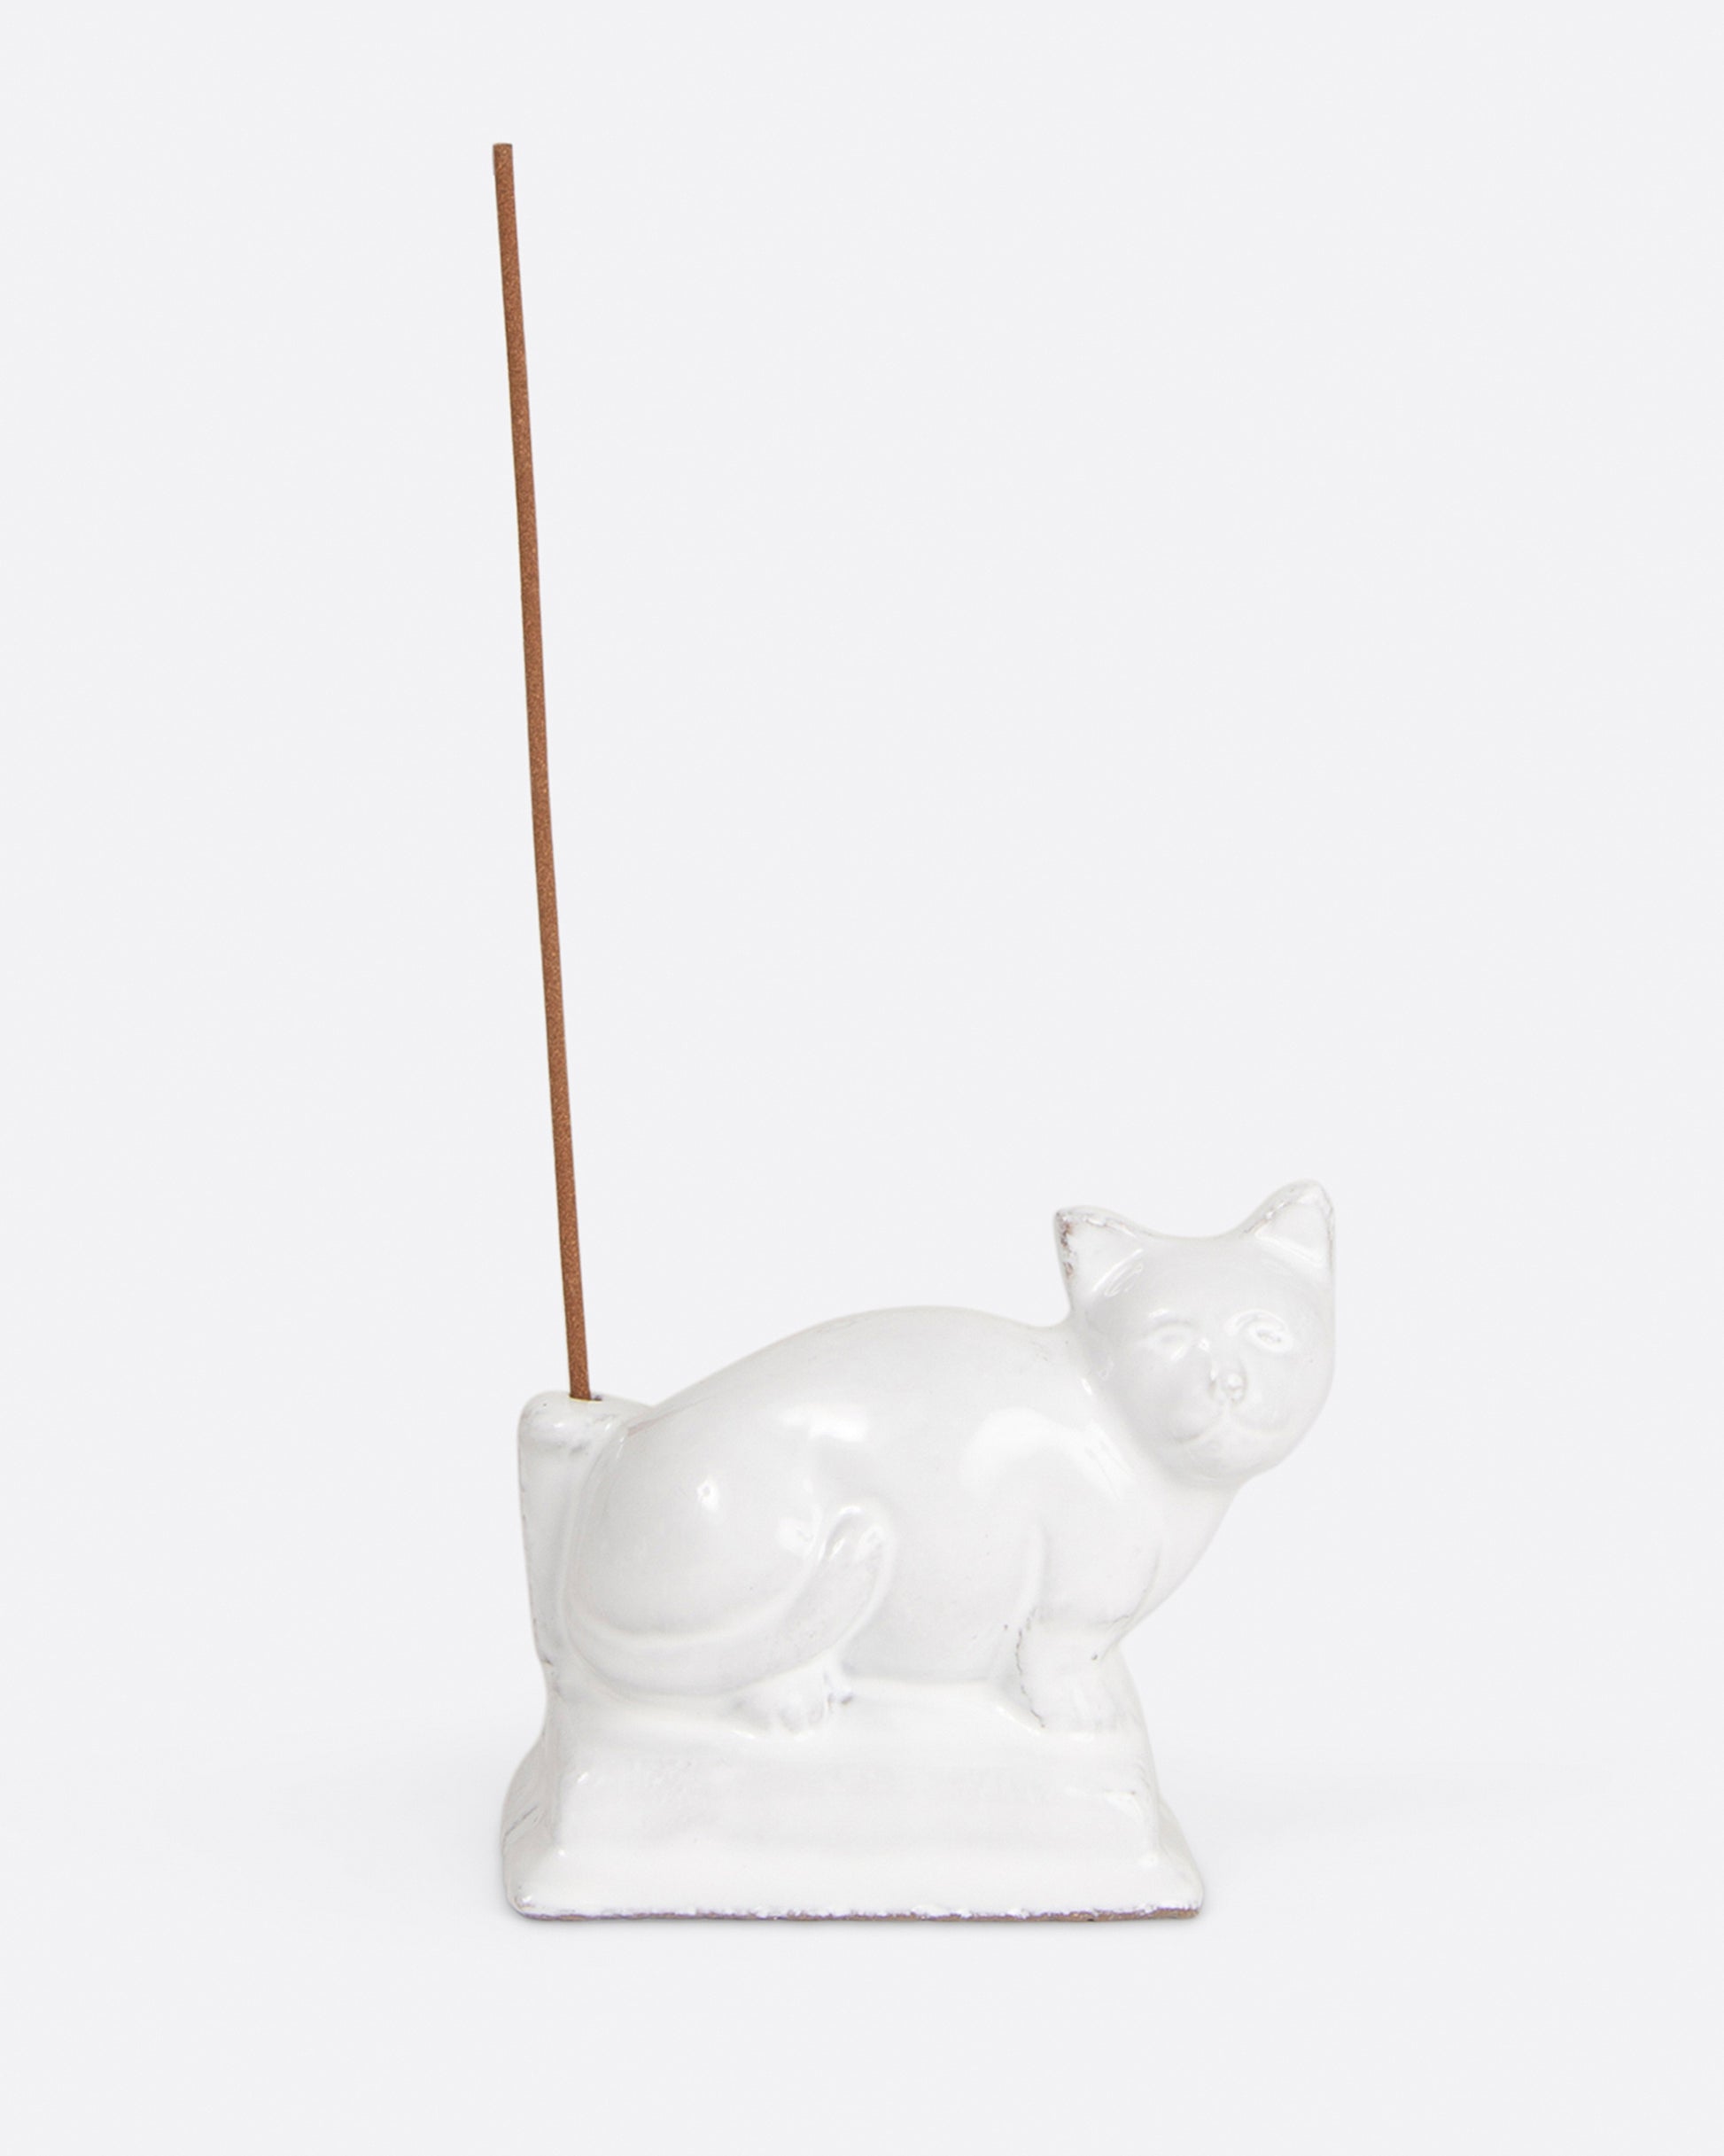 A glazed white ceramic cat-shaped incense holder with a stick of incense, shown from the front.